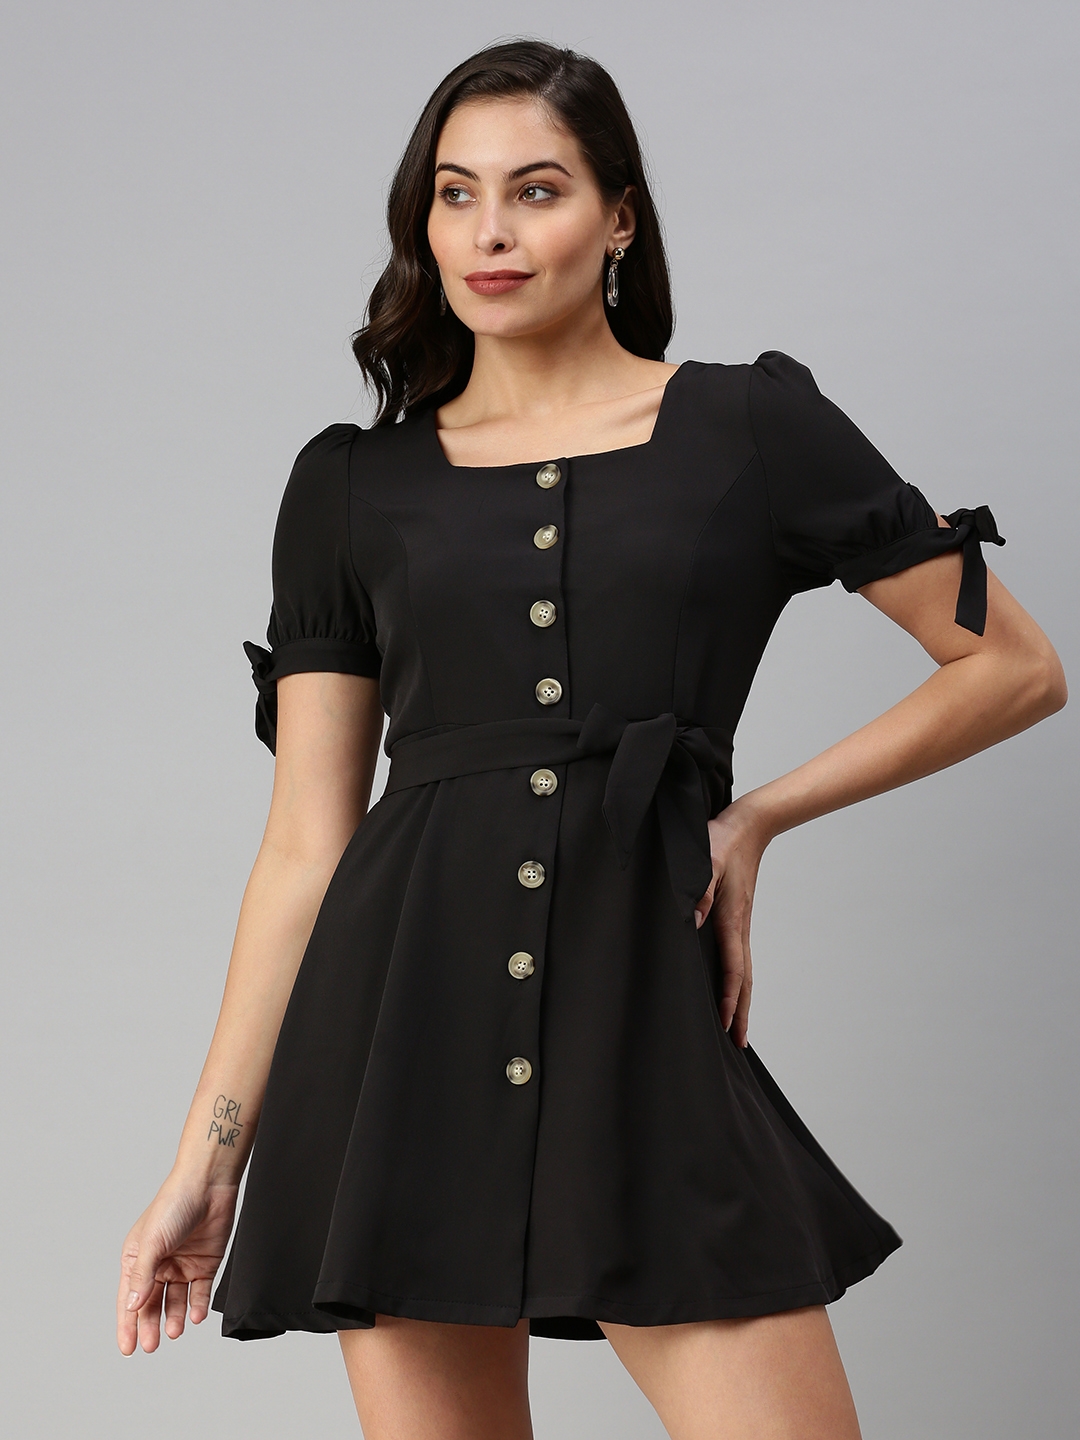 Women's Black Polyester Solid Dresses